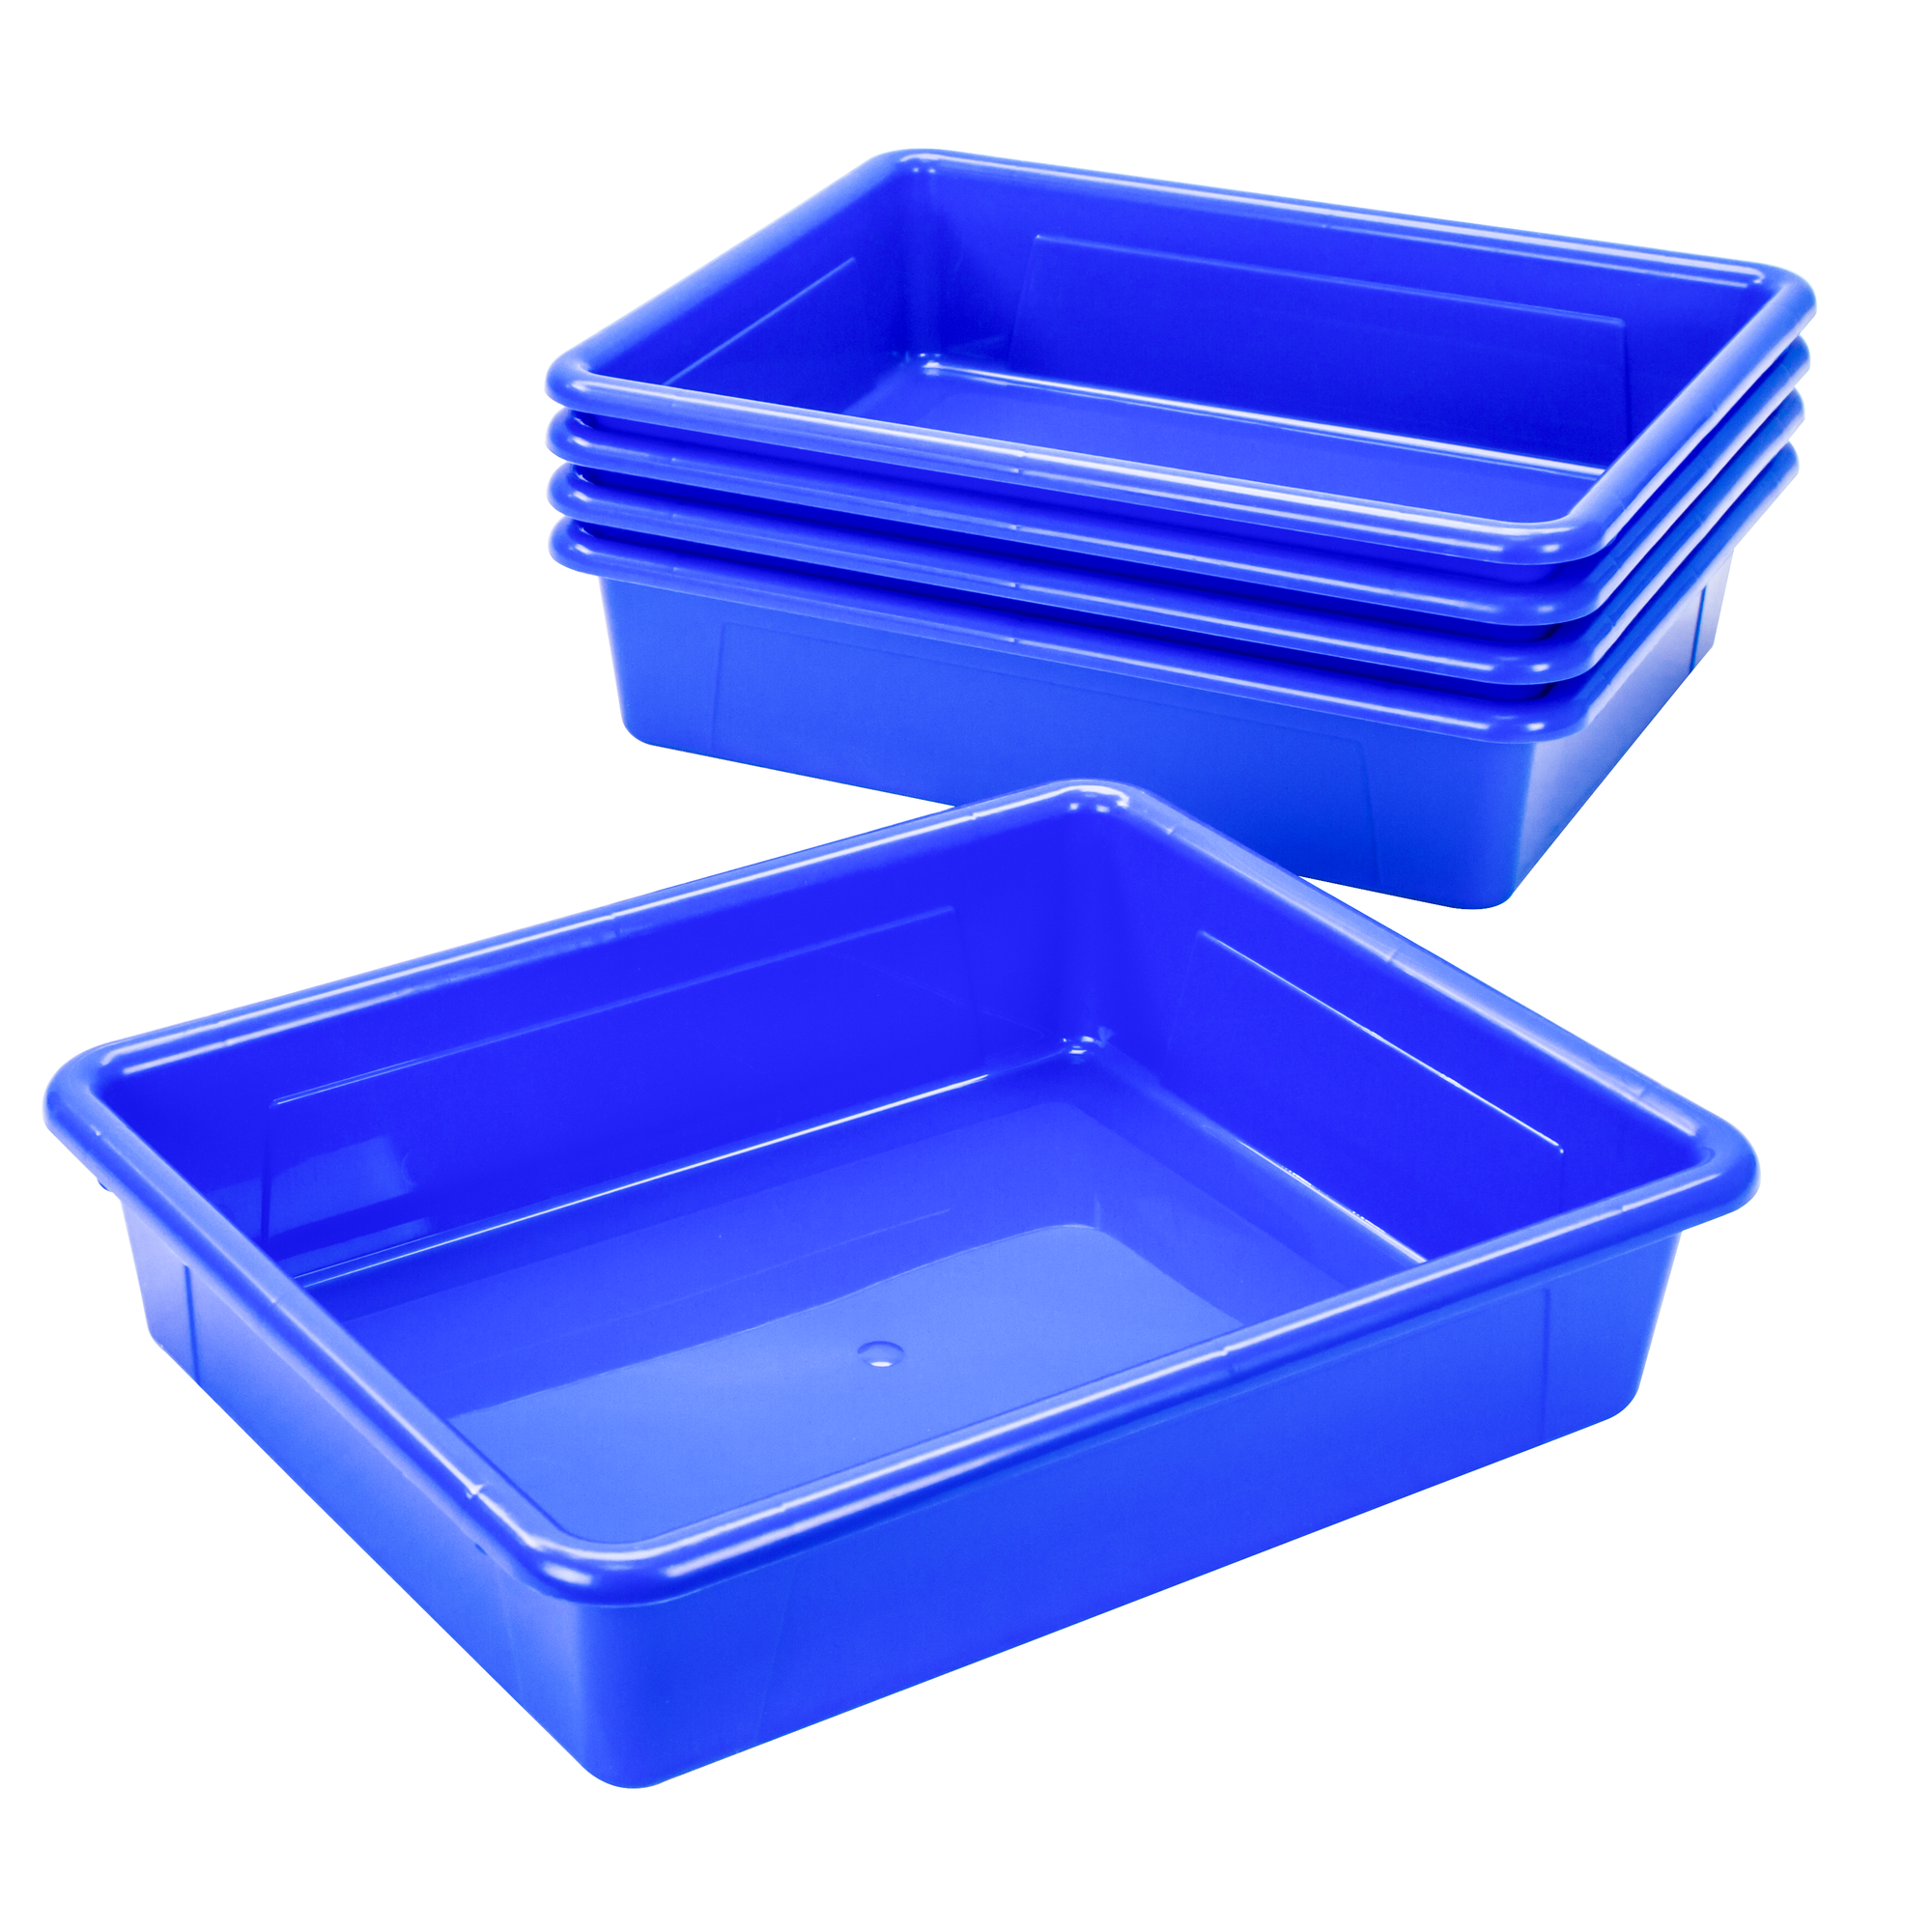 Storex Storage Tray, Letter Size, 10 x 13 x 3 Inches, Blue, 5-Pack